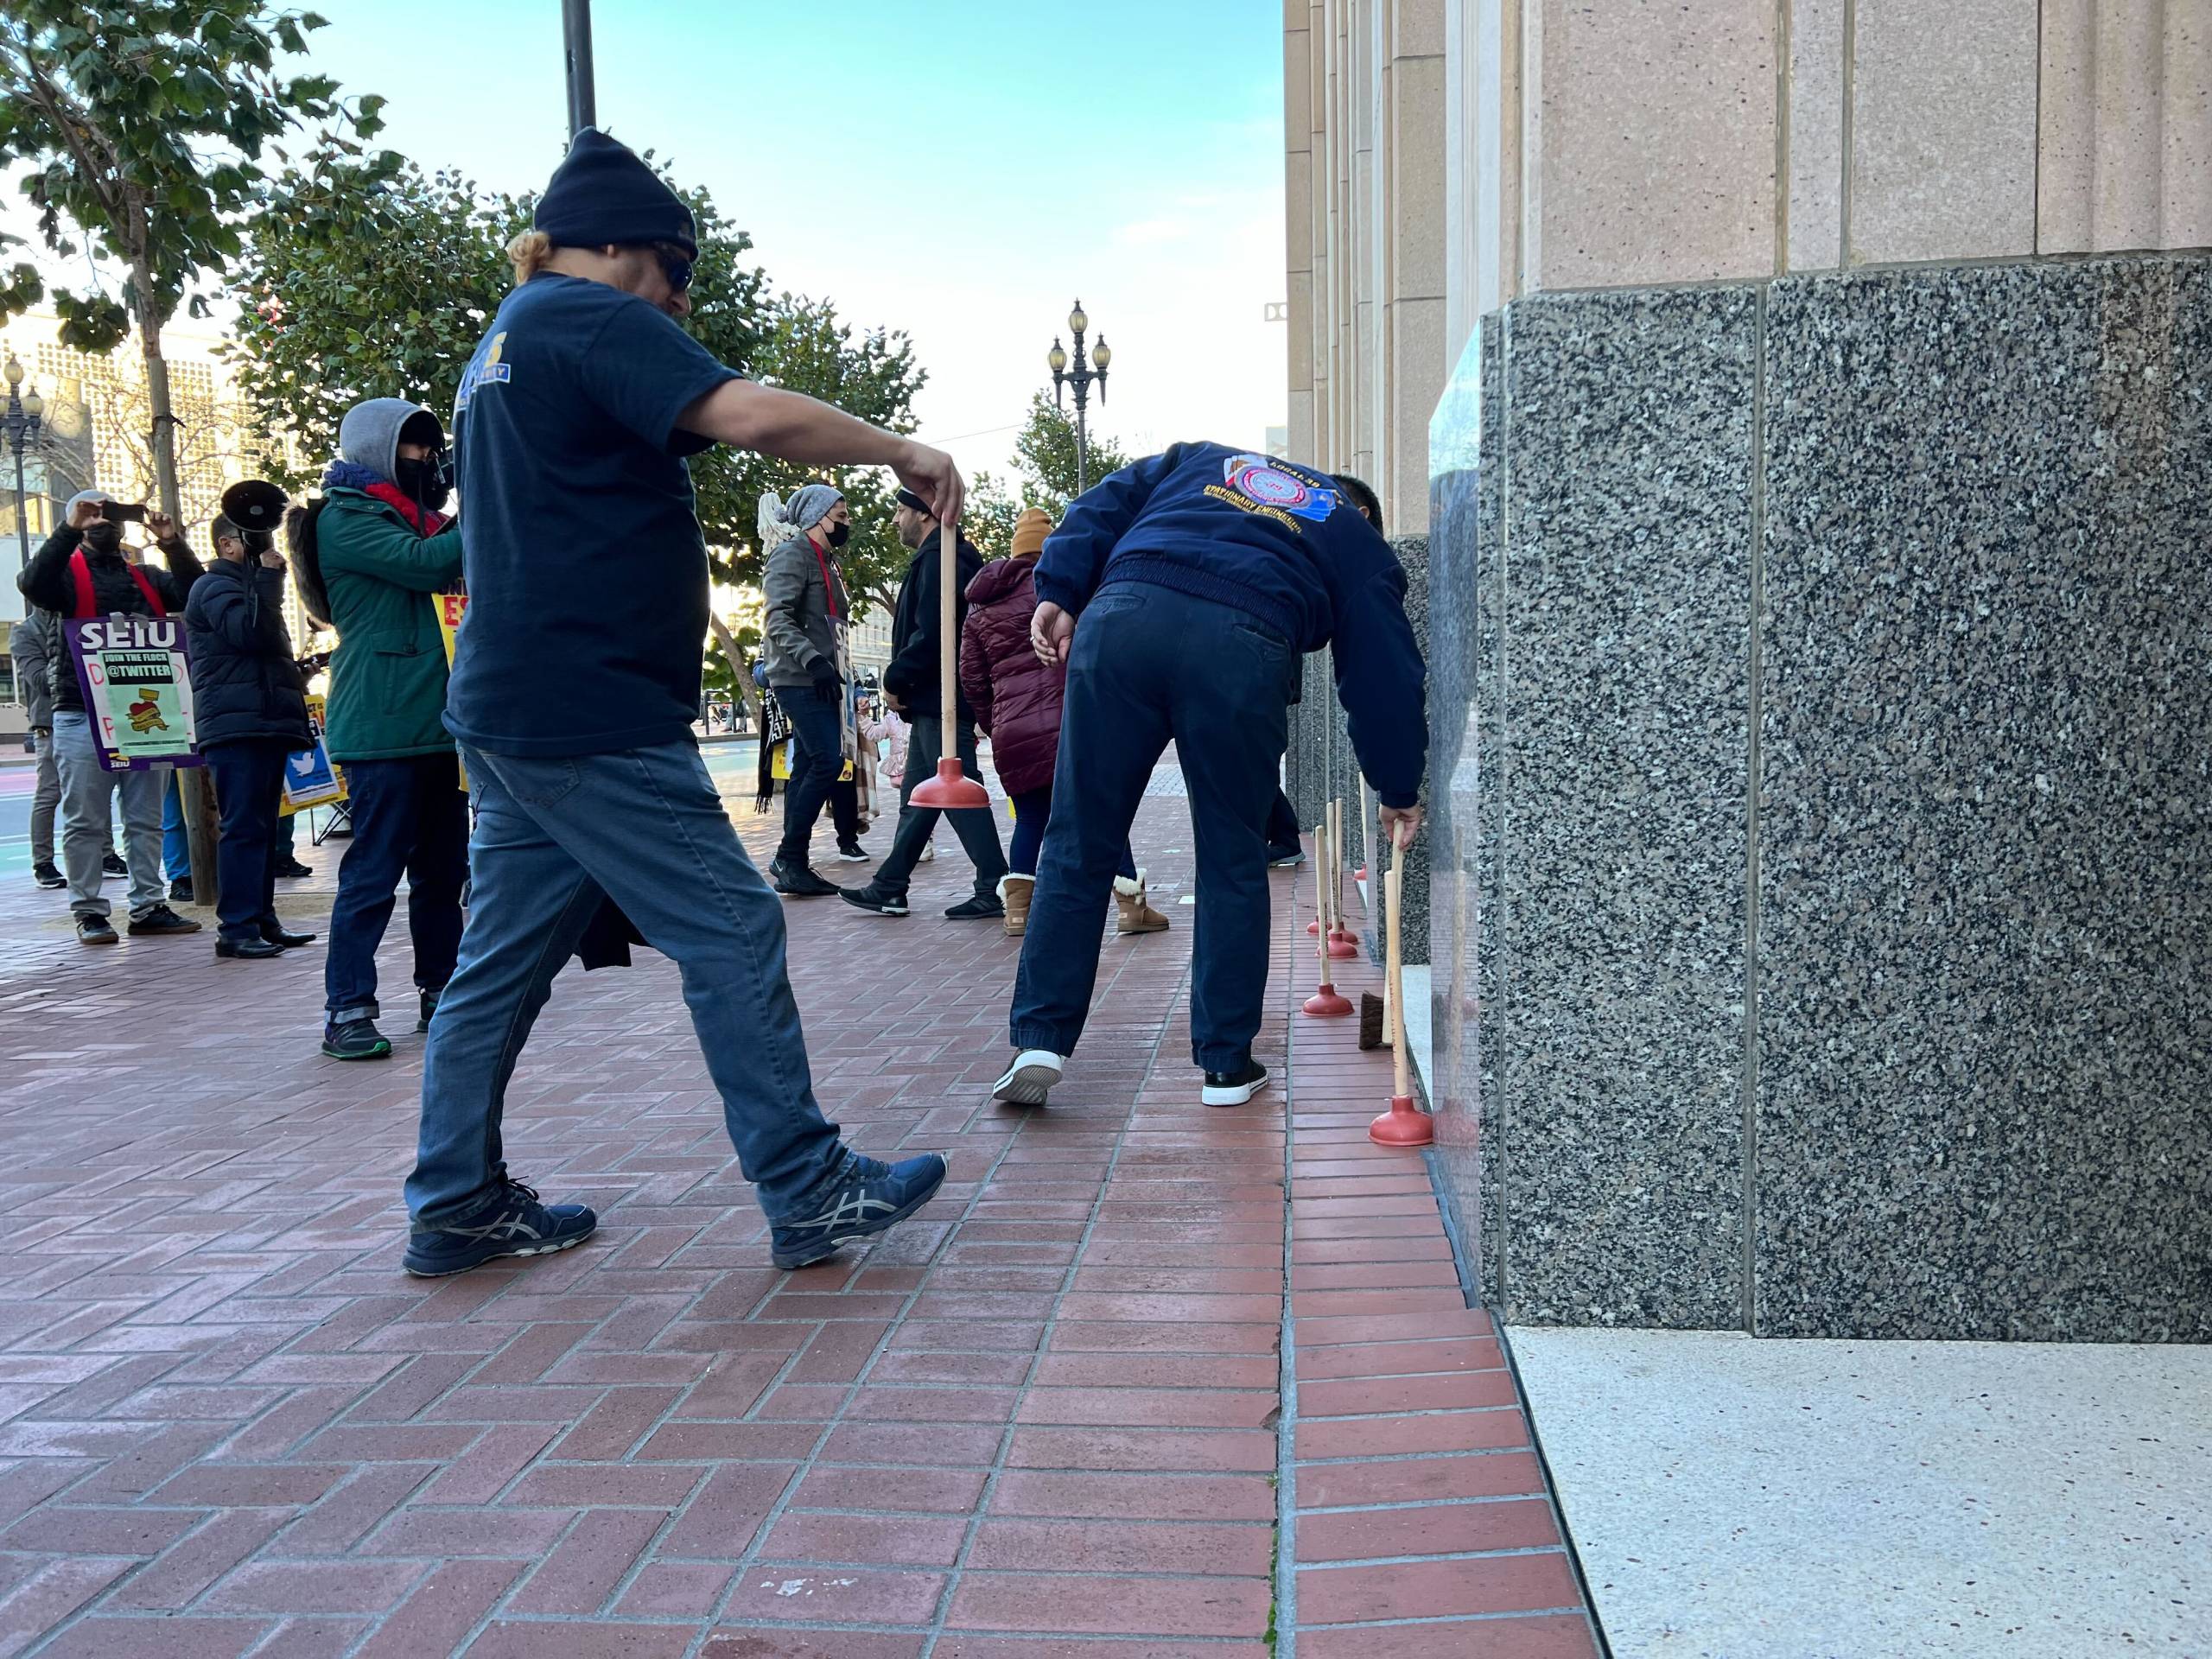 Men place plungers and mops outside a building in downtown San Francisco.